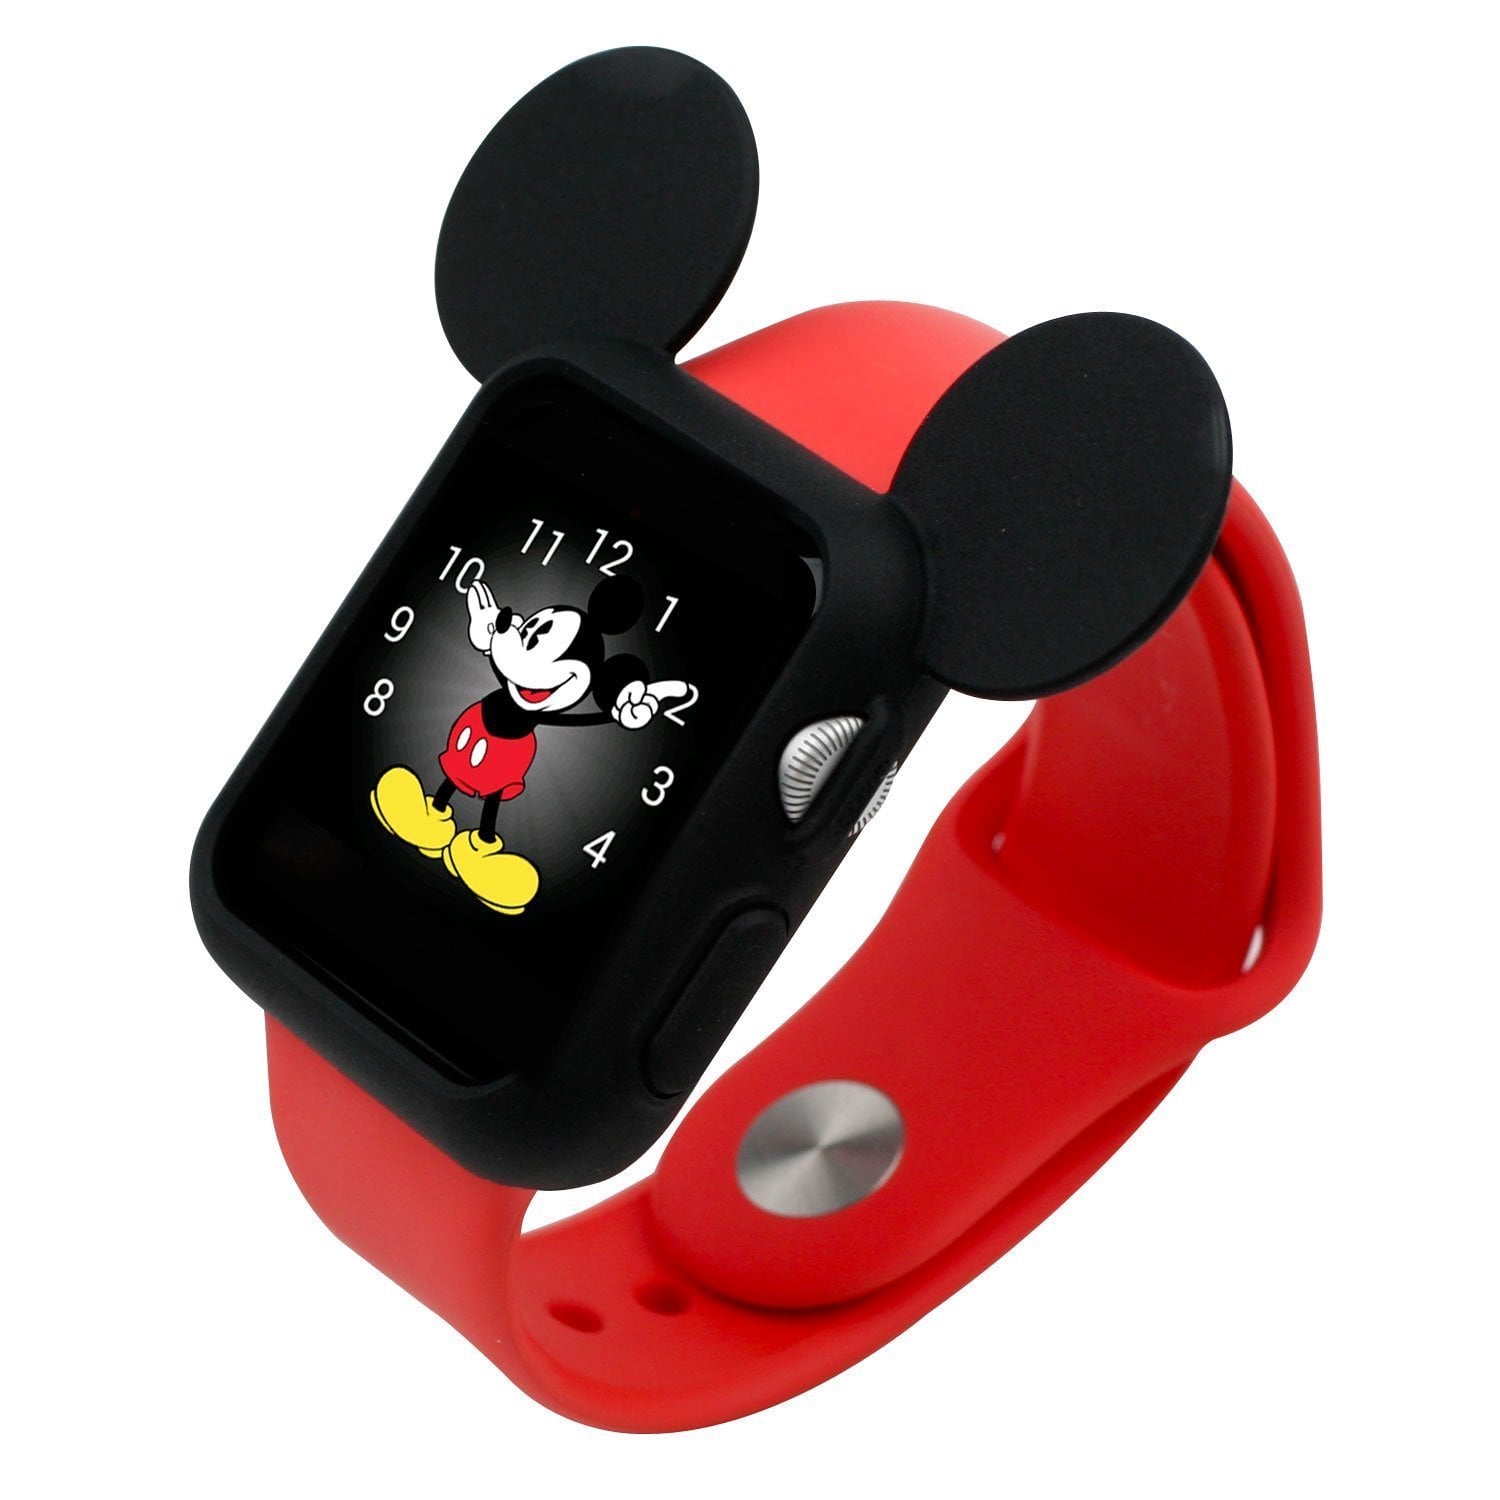 55 HQ Images Disney World Apple Watch Band / Disney Inspired print for Apple Watch Band 38 40 42 44 mm ...